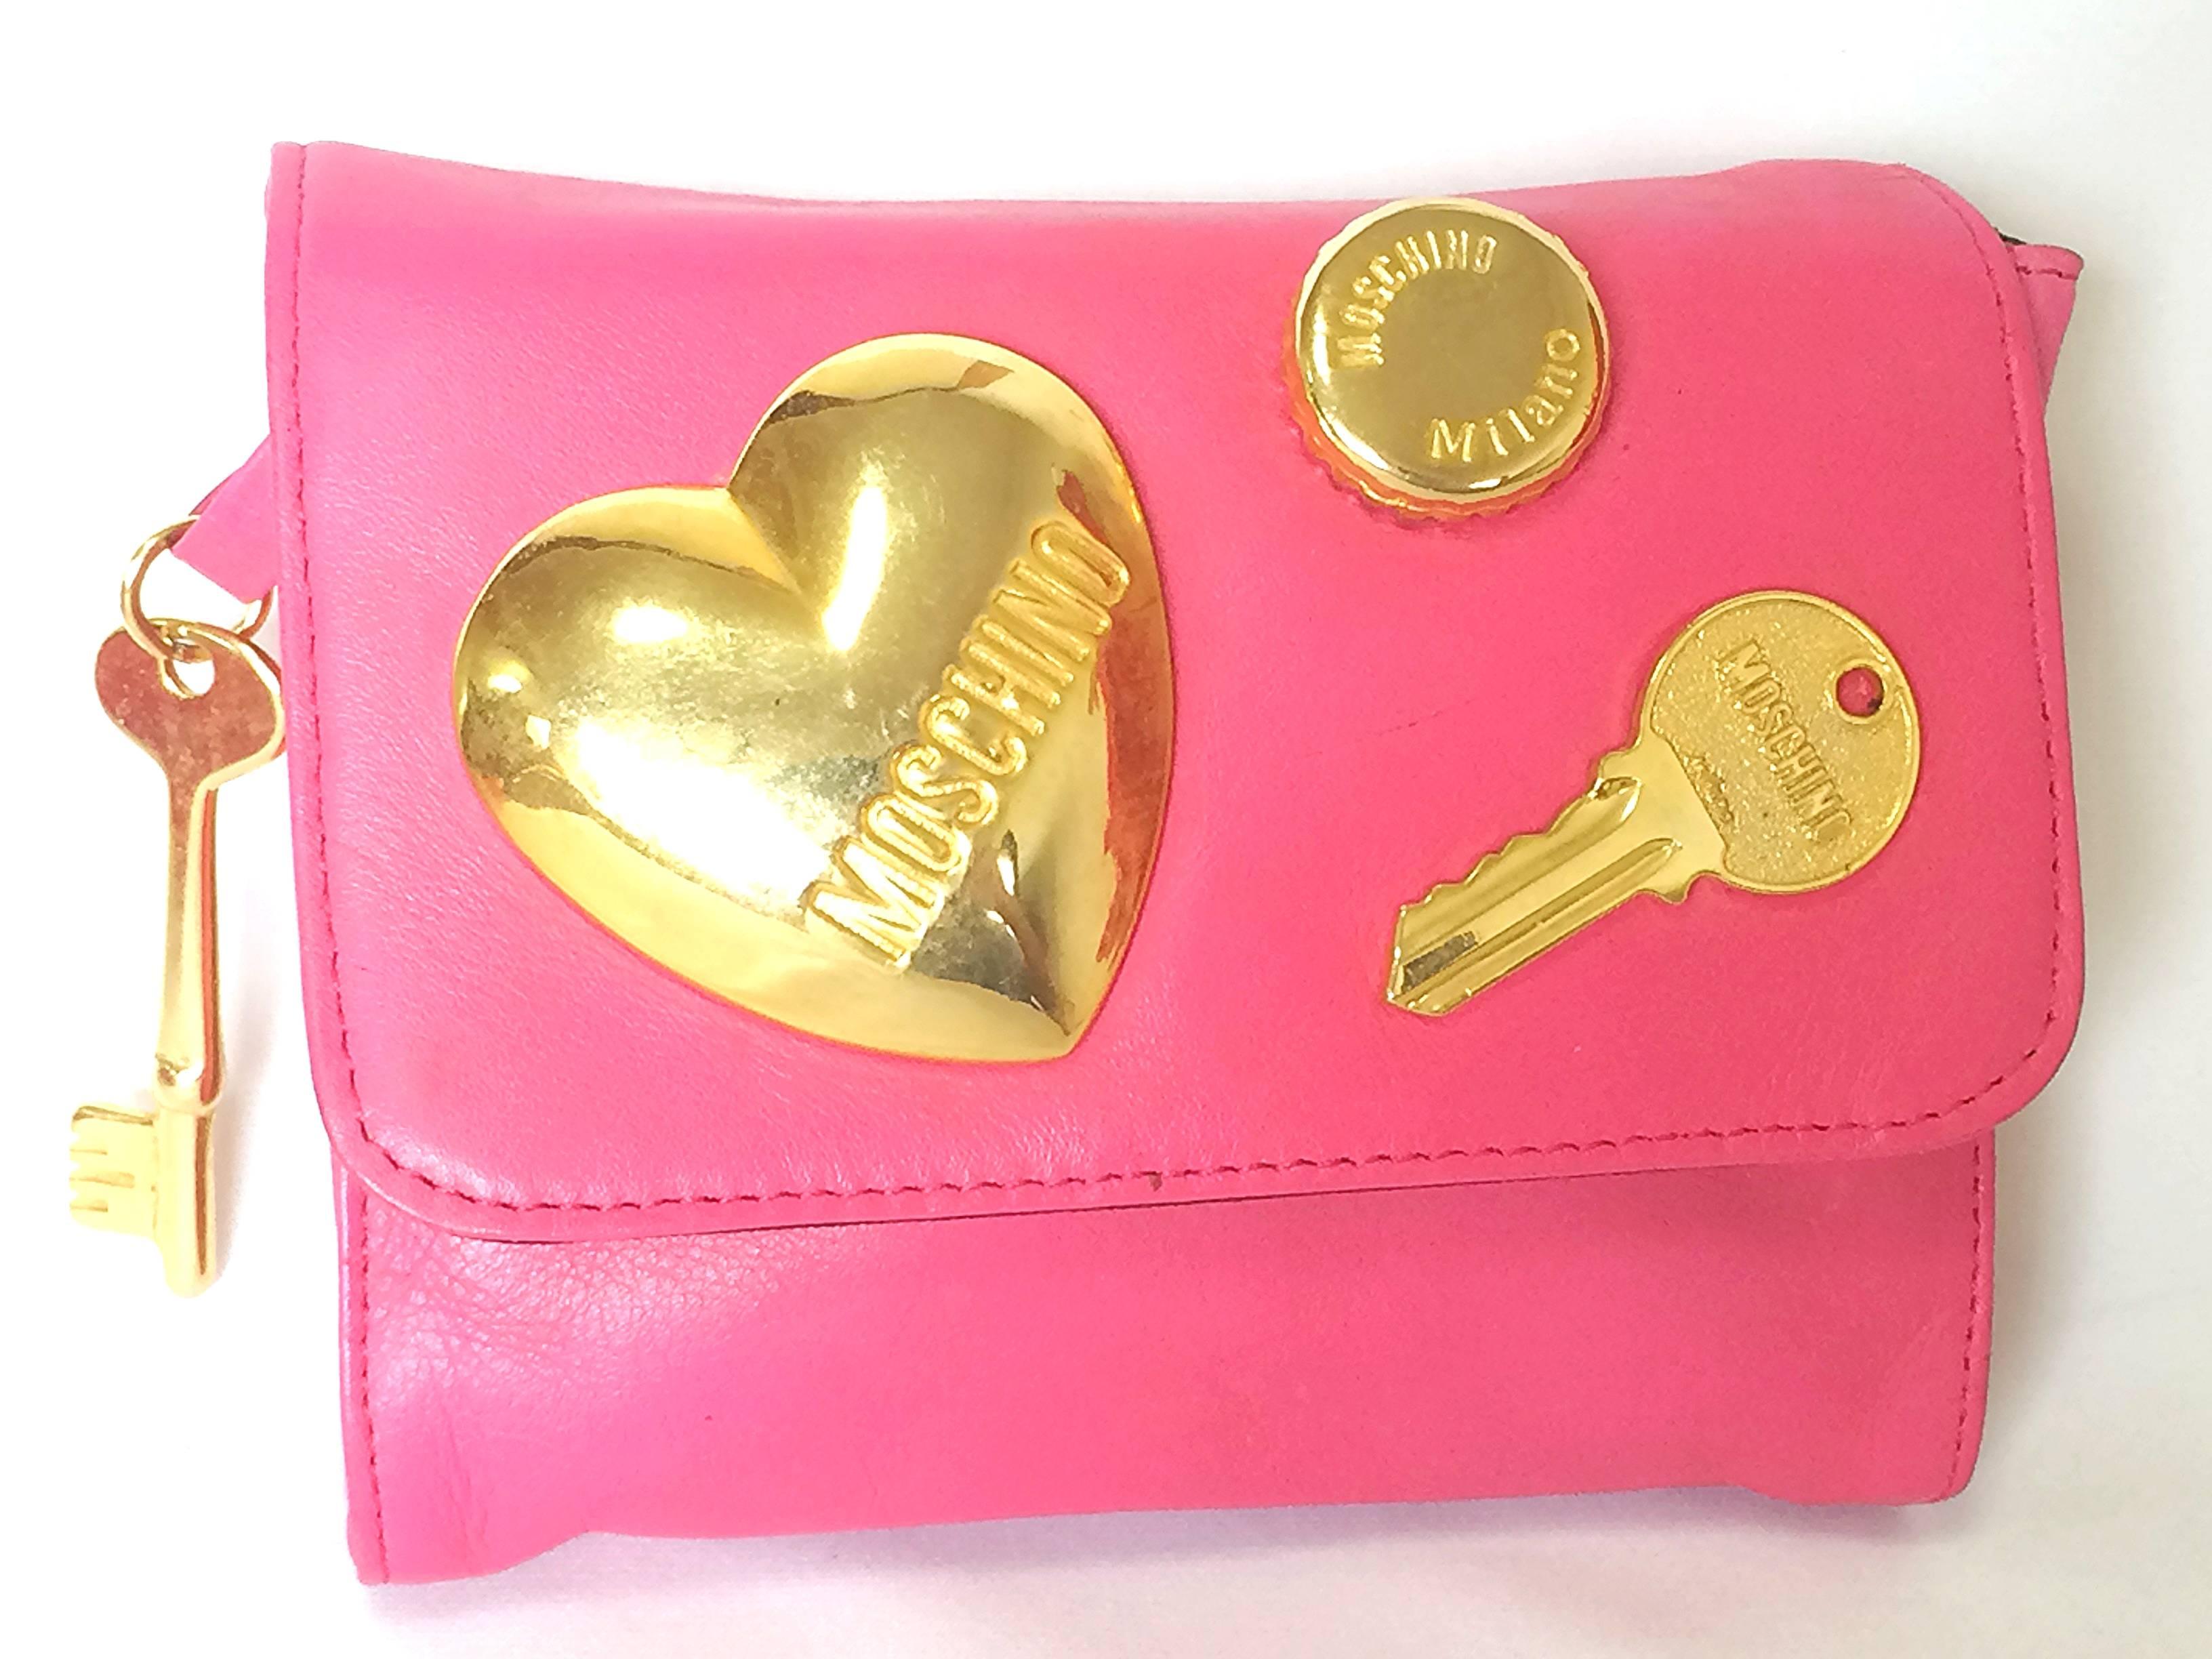 1990s. Vintage MOSCHINO pink leather waist purse, fanny bag, clutch bag with large golden heart and key motifs. So chic and mod.

This is a vintage MOSCHINO, cute shape waist purse/fanny pack with a matching belt with golden large heart motif, key